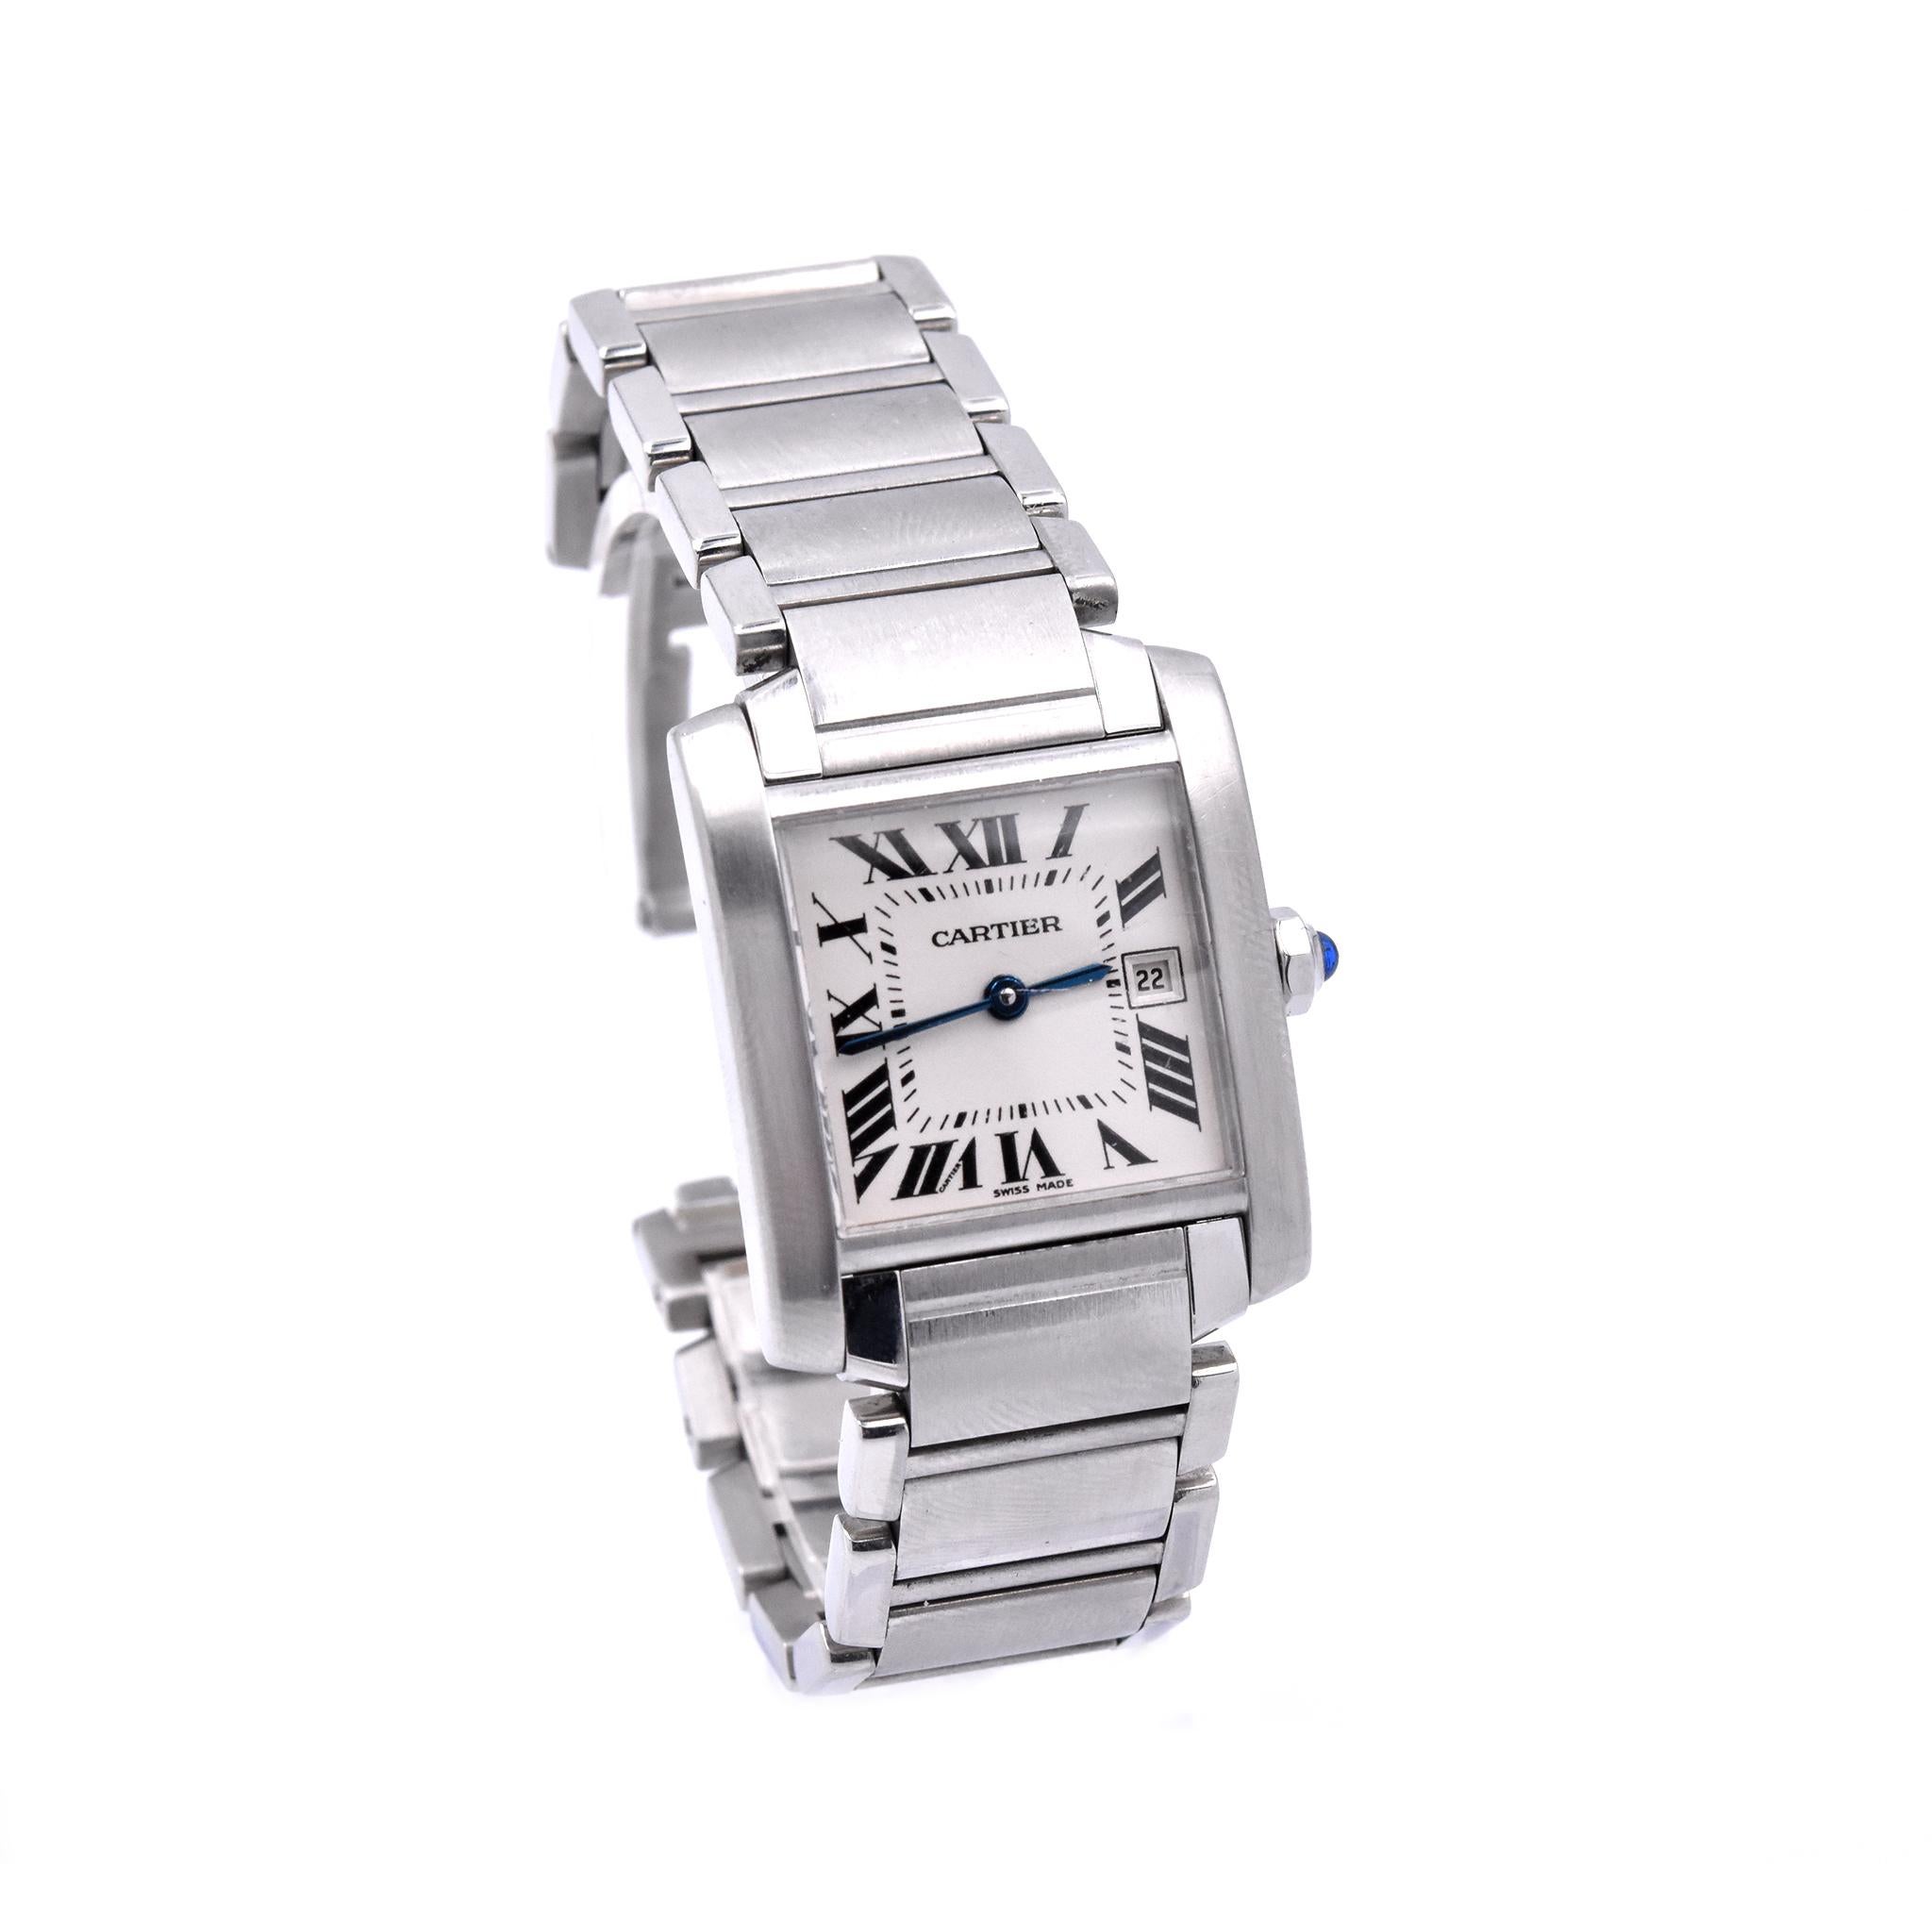 Movement: quartz
Function: hours, minutes, date
Case: 24.5mm x 32.5mm rectangular case, push pull crown, sapphire crystal
Dial: white dial, blue steeled hands, roman numeral hour markers
Band: stainless steel bracelet with butterfly clasp
Serial #: